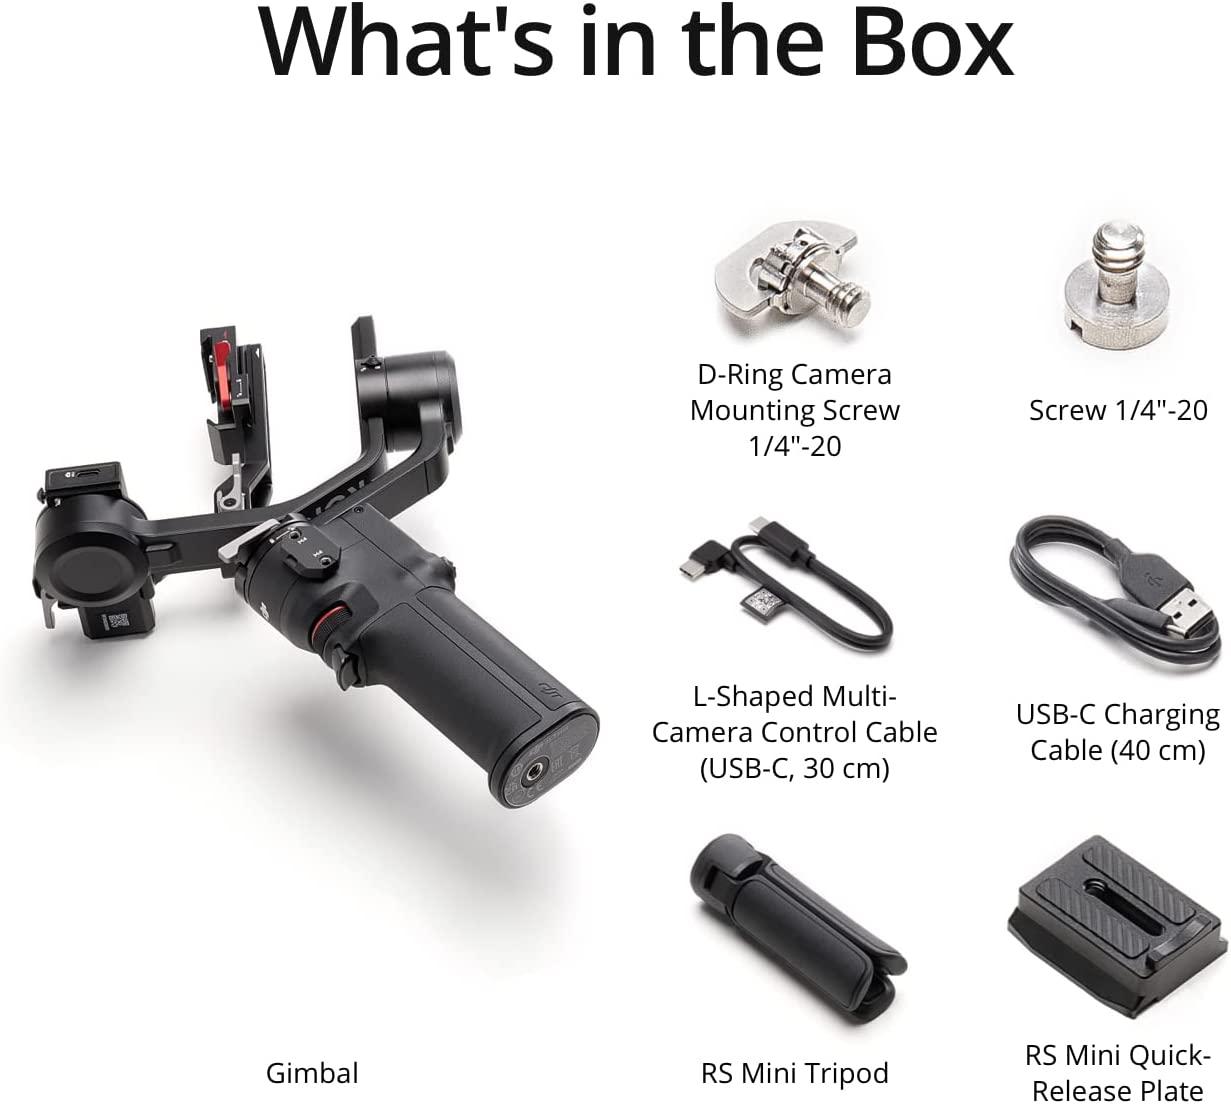 Buy DJI RS 3 Gimbal Stabilizer at Lowest Price in India